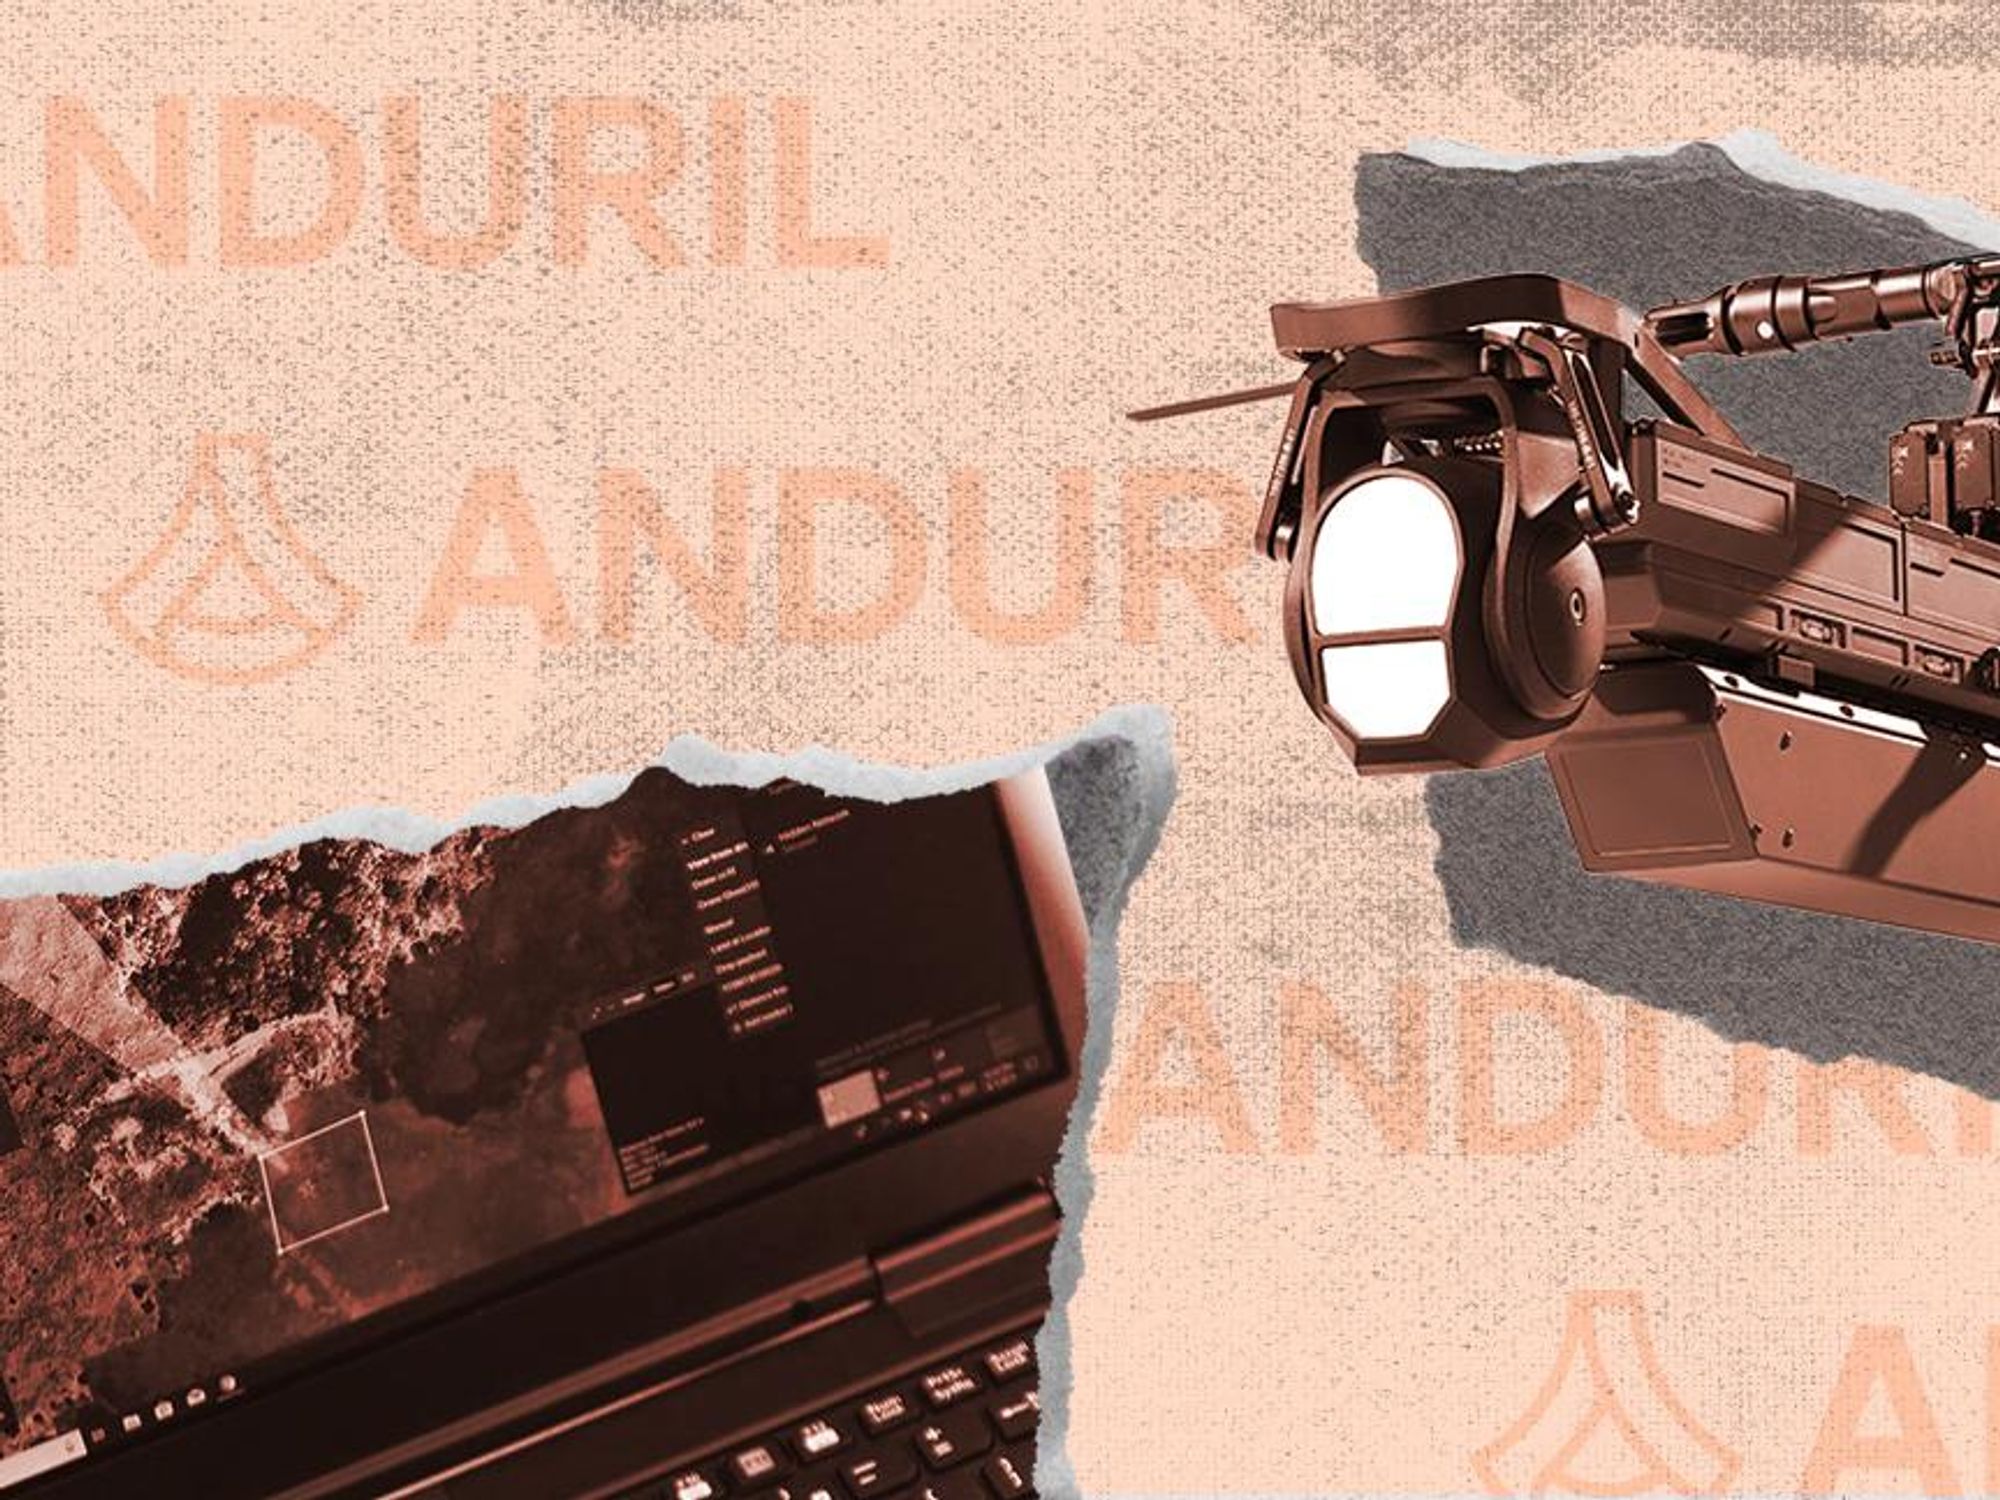 Anduril Industries Is Getting Hundreds of Millions to Build Border Surveillance Tech